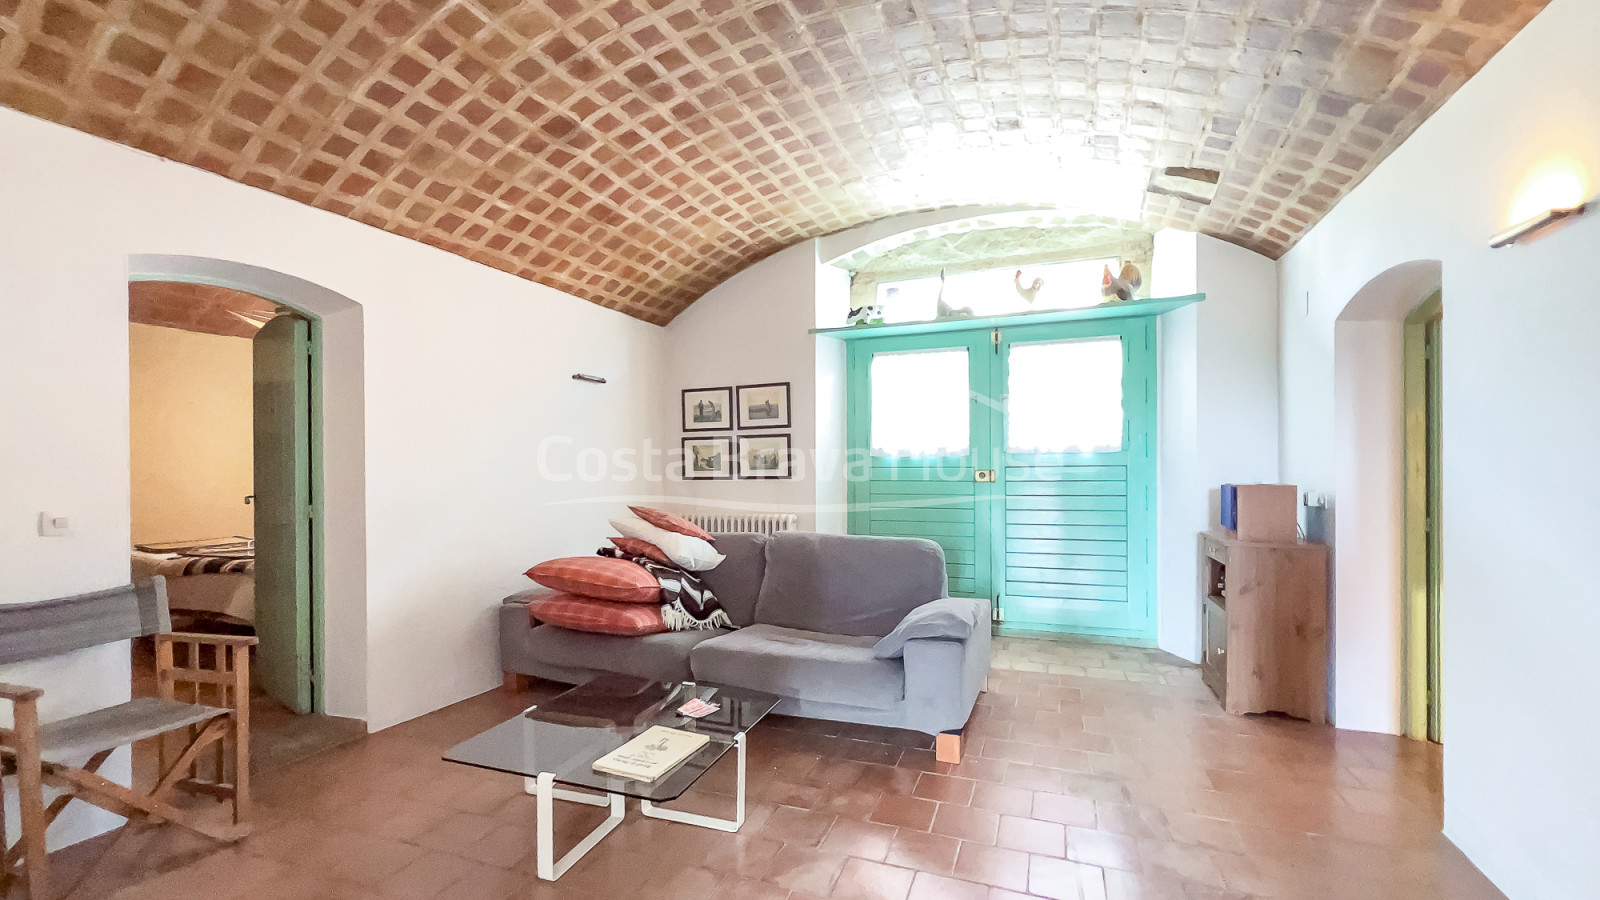 Renovated Village House in Corçà with Garden and Swimming Pool